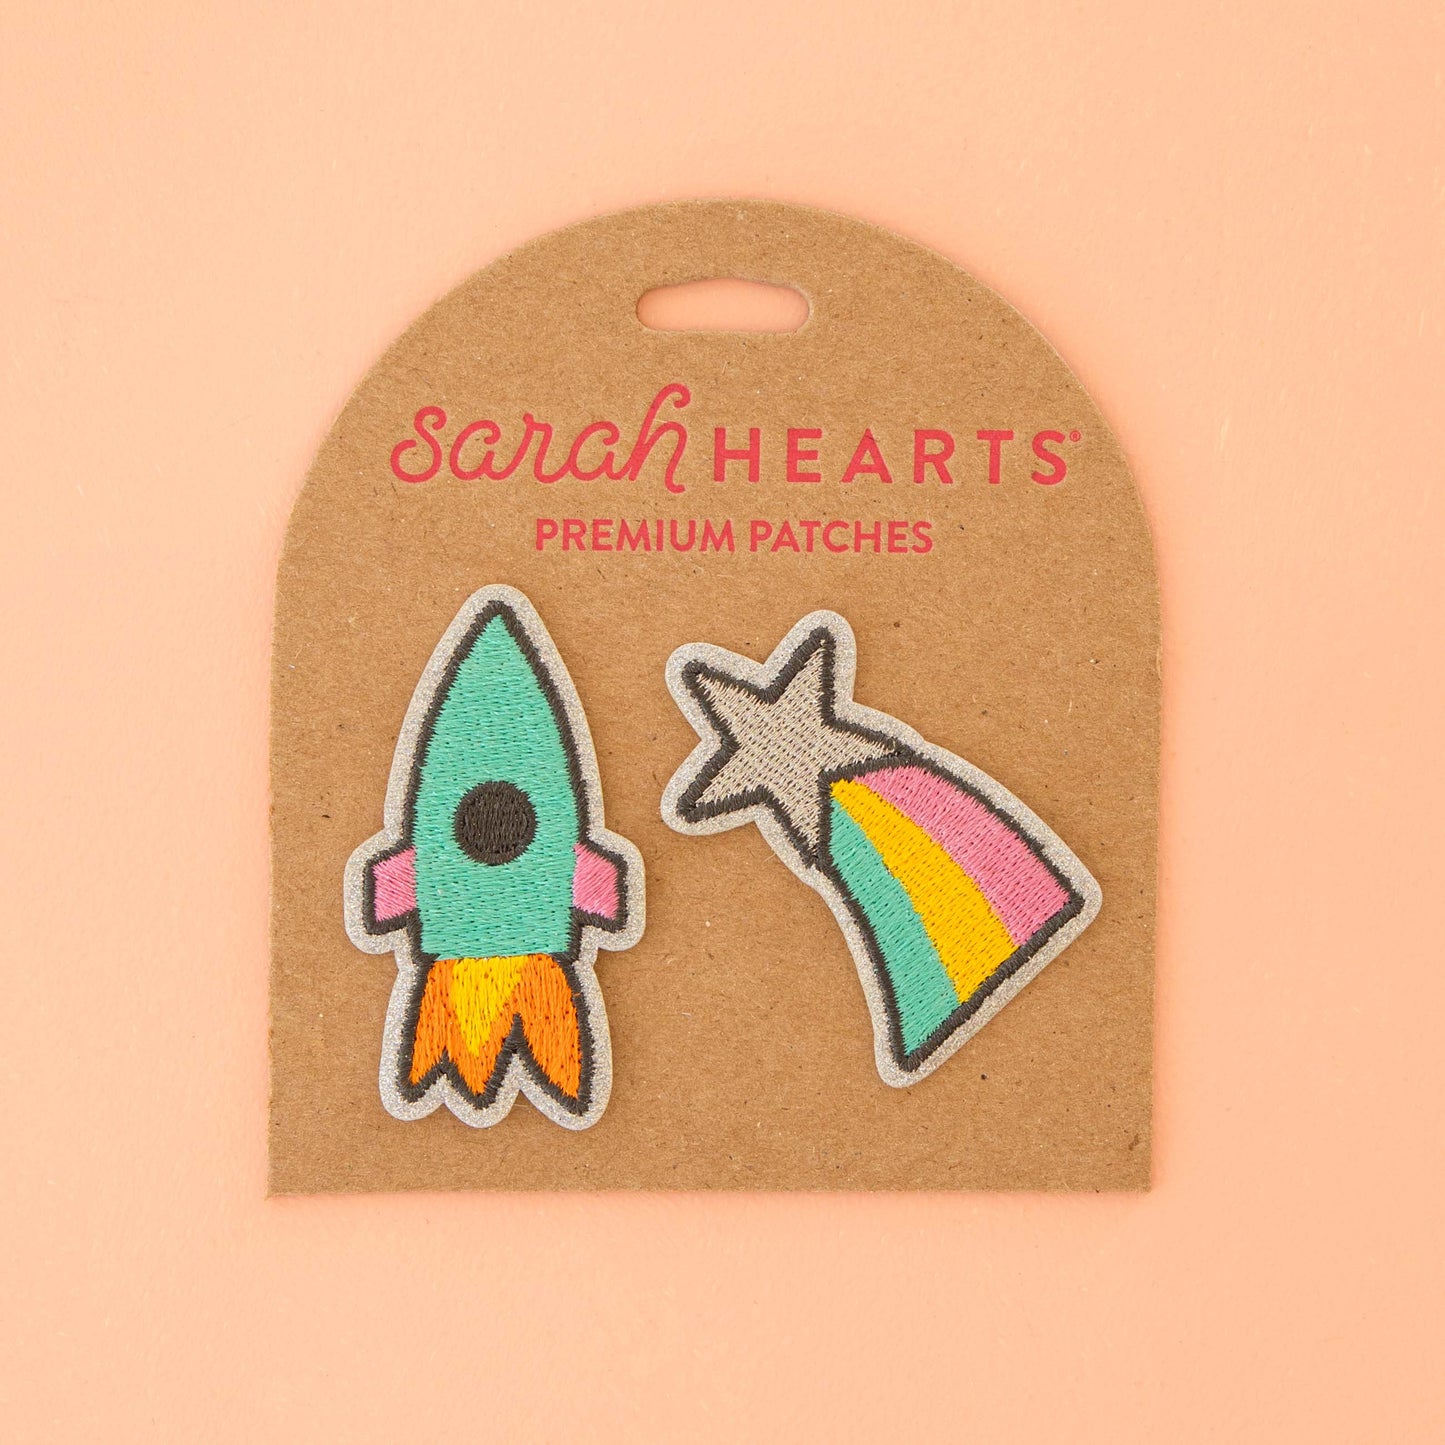 Rocket Ship and Shooting Star Embroidered Patches - 2 Pack